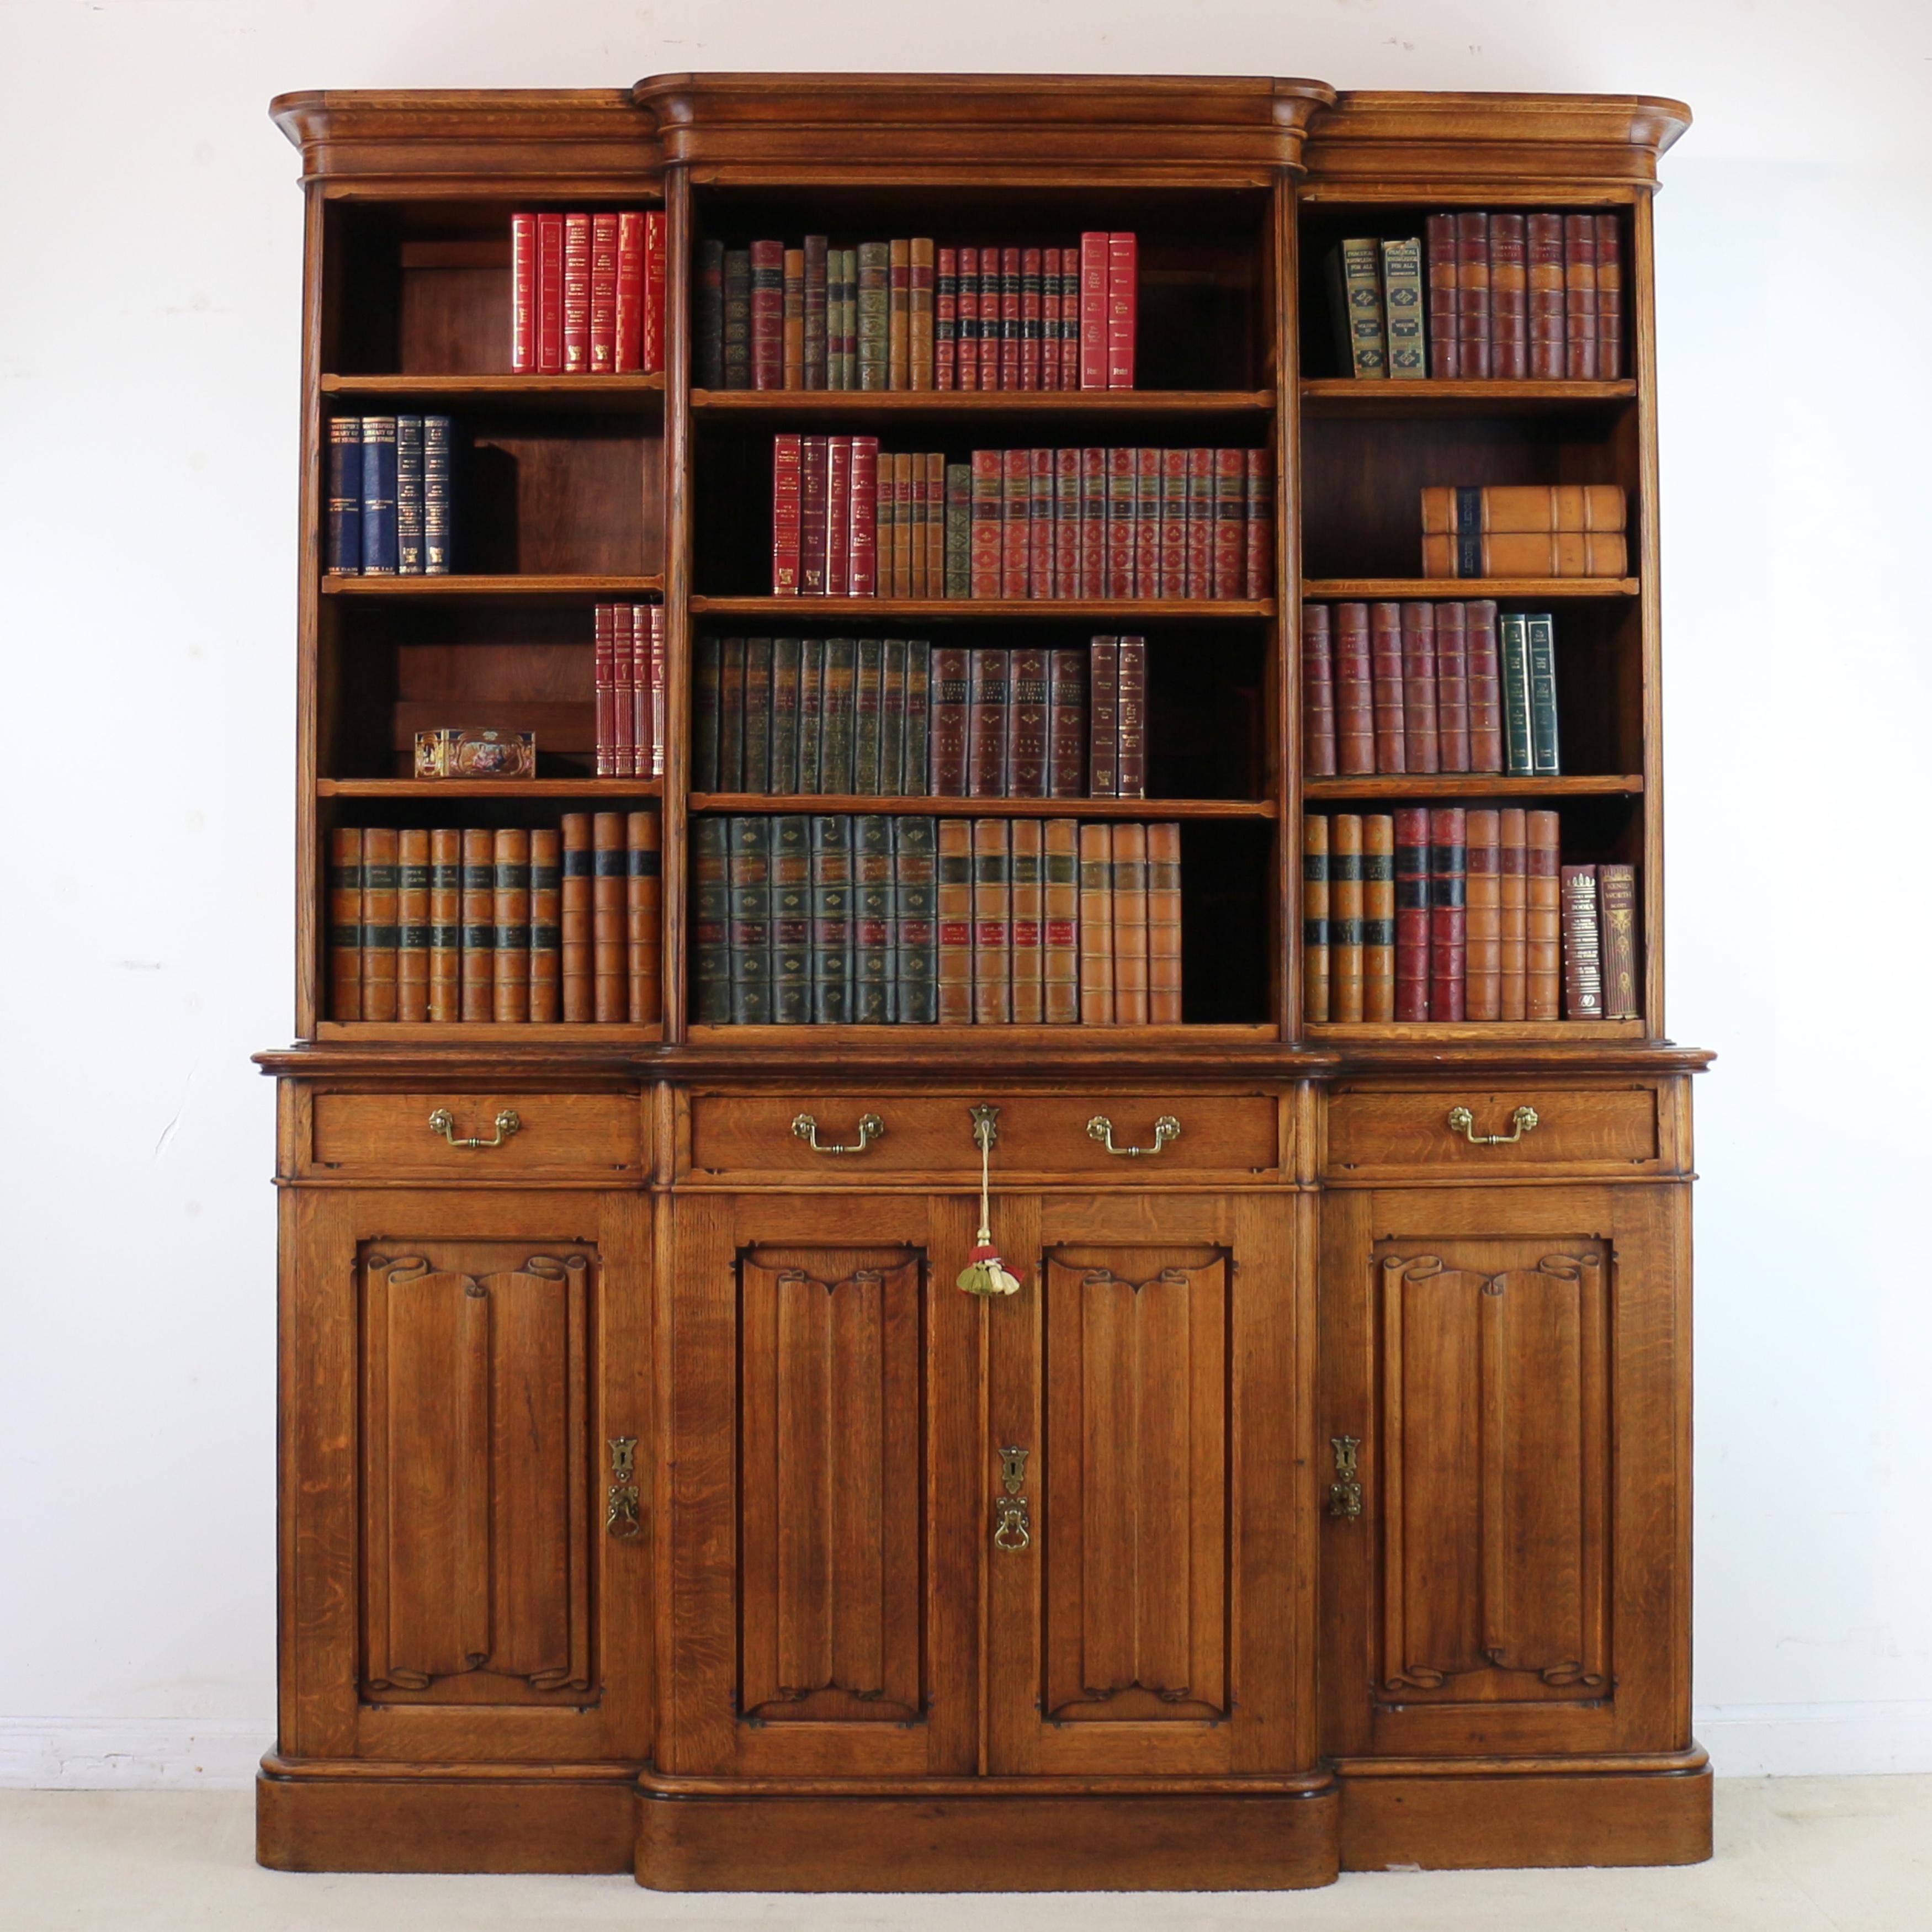 A Victorian Gothic Revival quarter sawn oak breakfront bookcase in the Pugin style and attributable to Gillows of Lancaster. This super Arts & Crafts bookcase features crisply carved linenfold panels and Gothic brass handles and backplates. With a